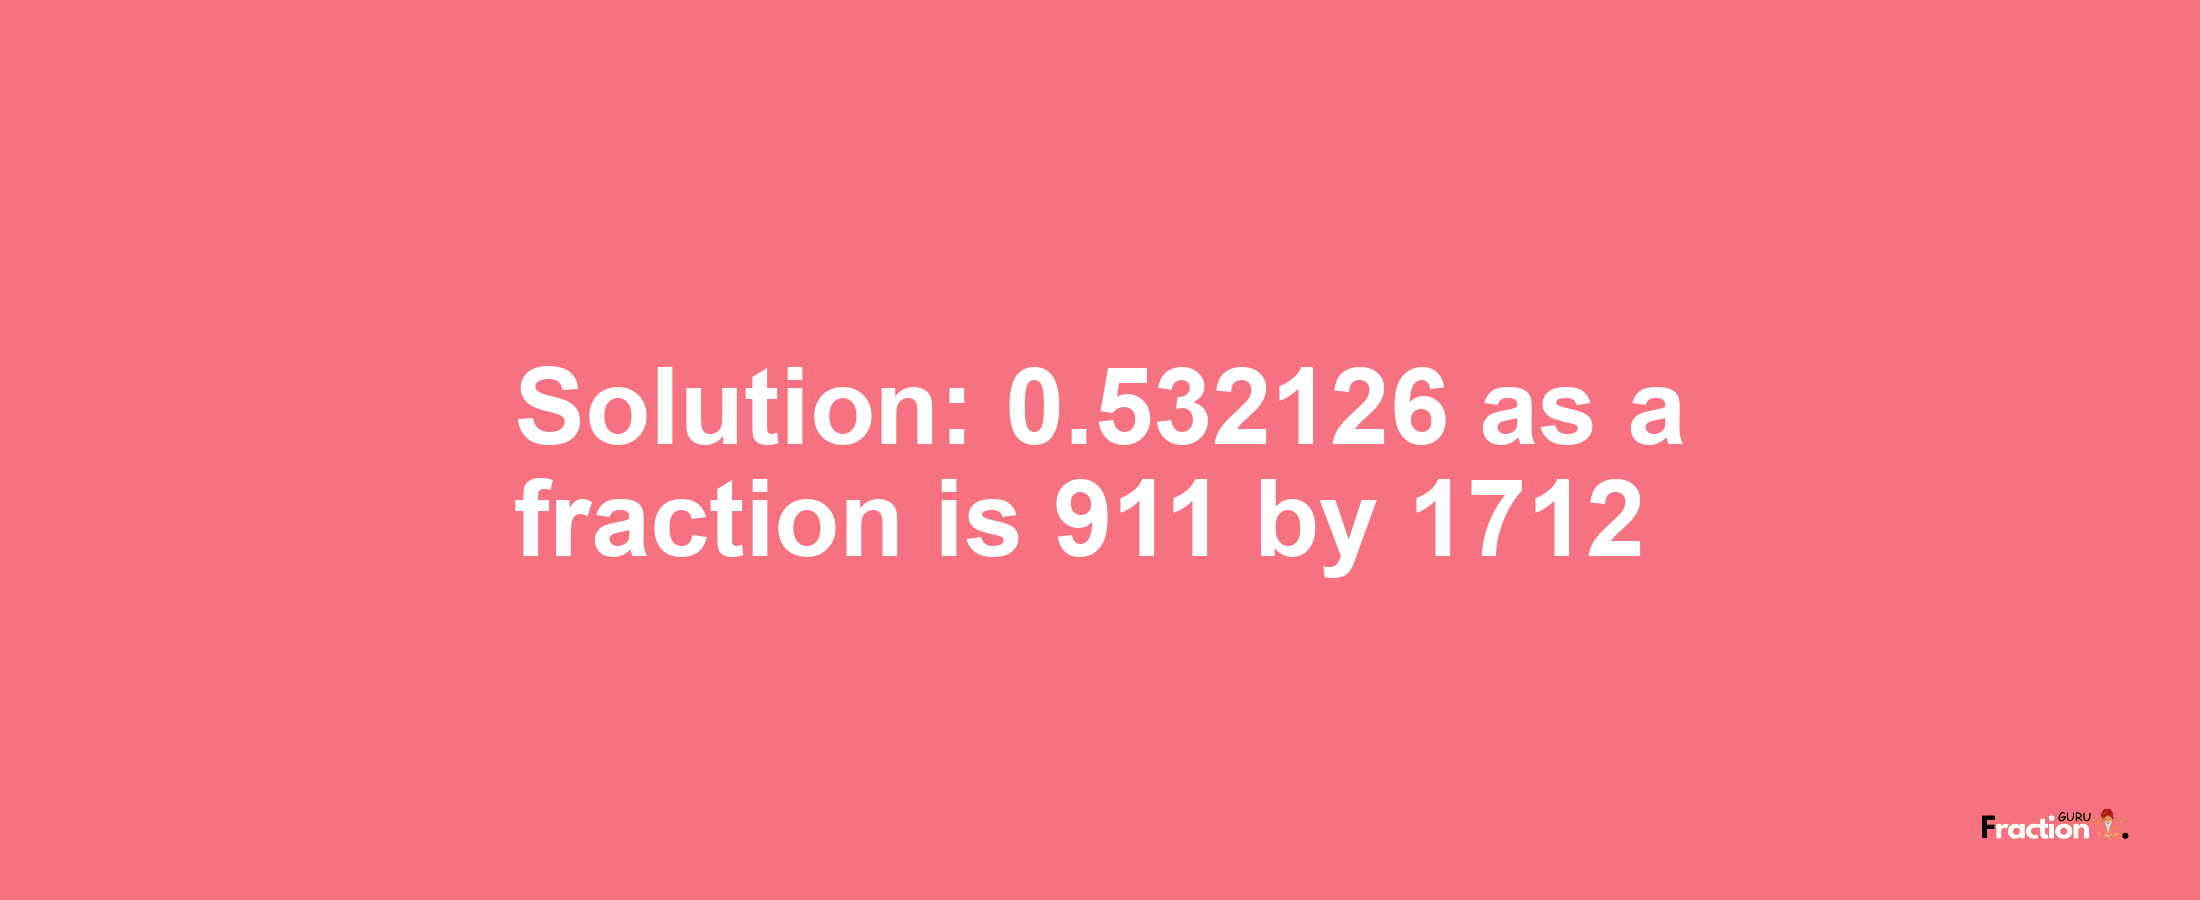 Solution:0.532126 as a fraction is 911/1712